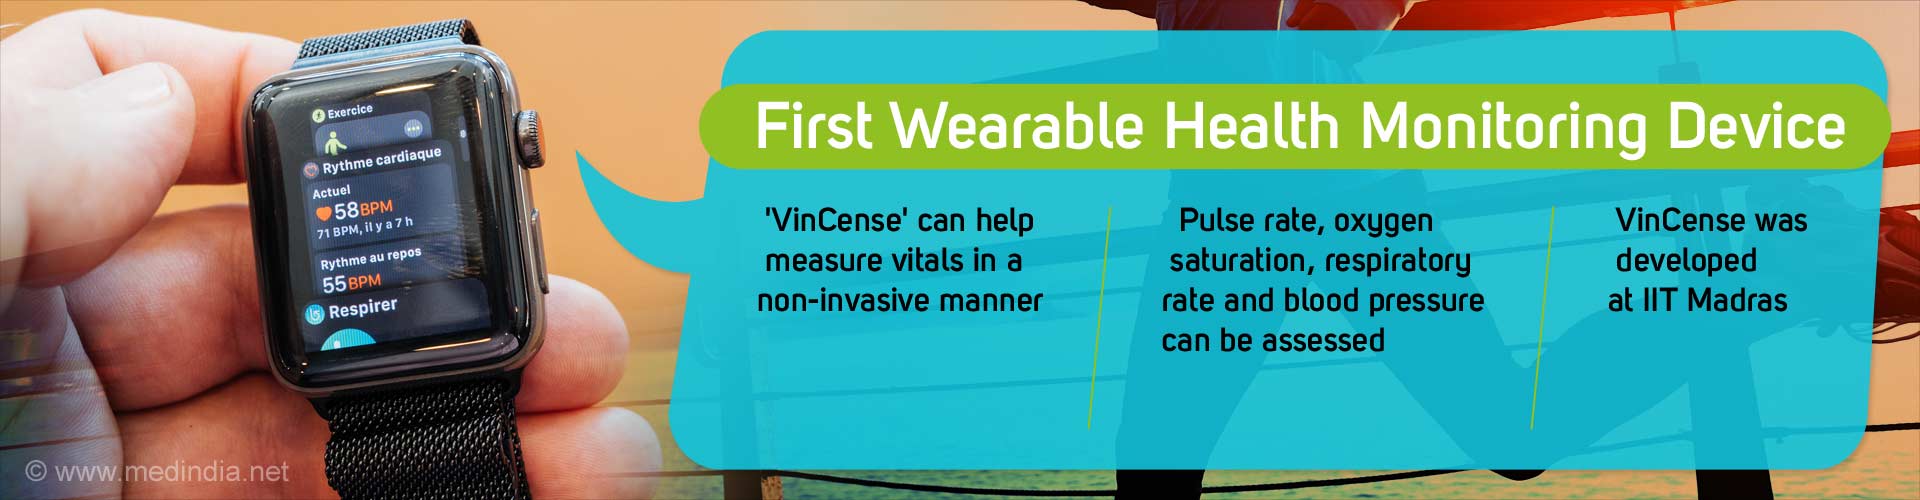 first wearable health monitoring device
- VinCense can help measure vitals in a non-invasive manner
- pulse rate, oxygen saturation, respiratory rate and blood pressure can be assessed
- VinCense was developed at IIT Madras
